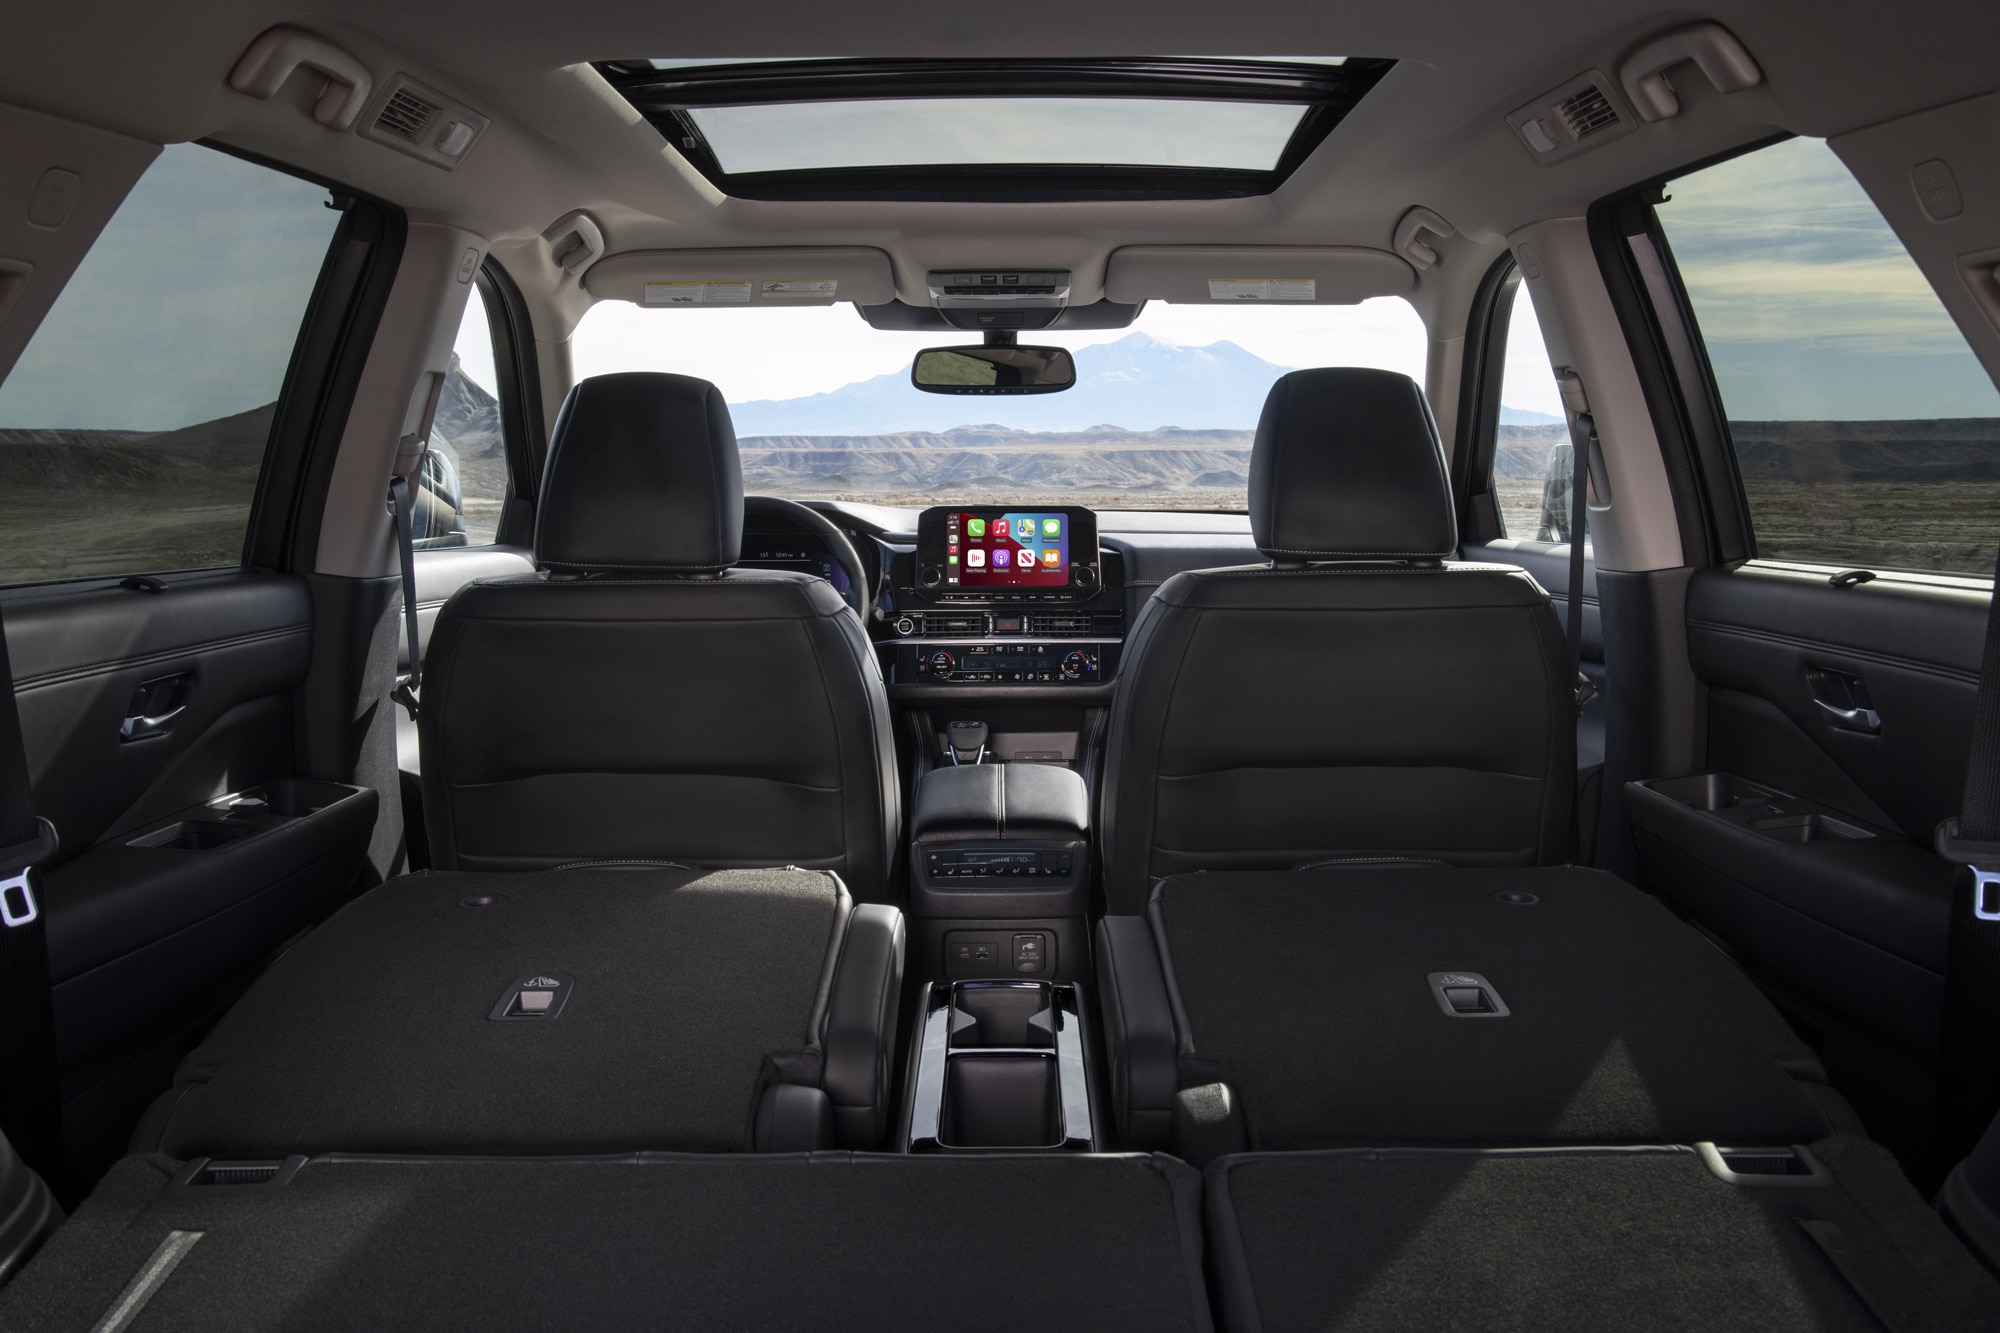 2023 Nissan Pathfinder second- and third-row seats down